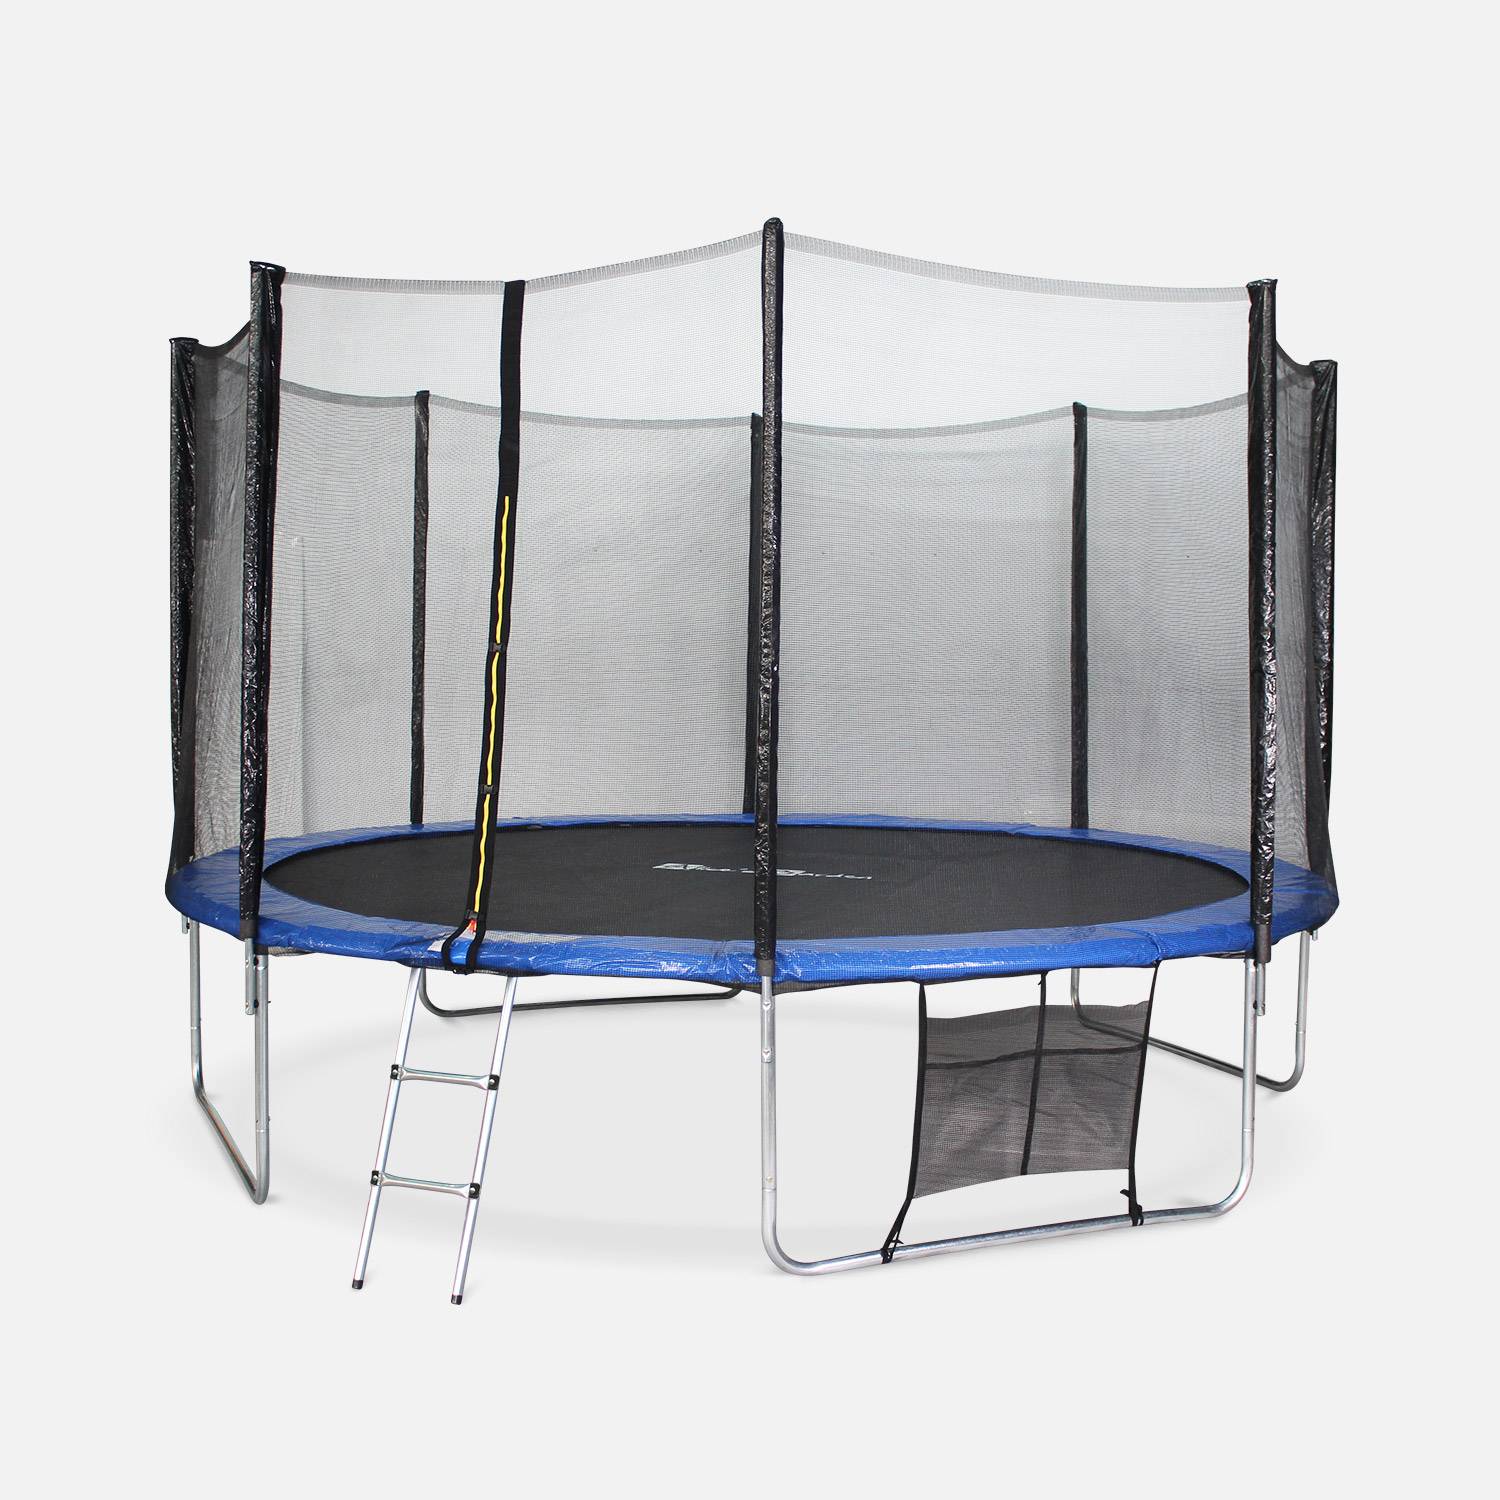 Ø13ft trampoline with accessory kit, shoe organiser, ladder, rain cover, safety net and anchoring kit Photo2